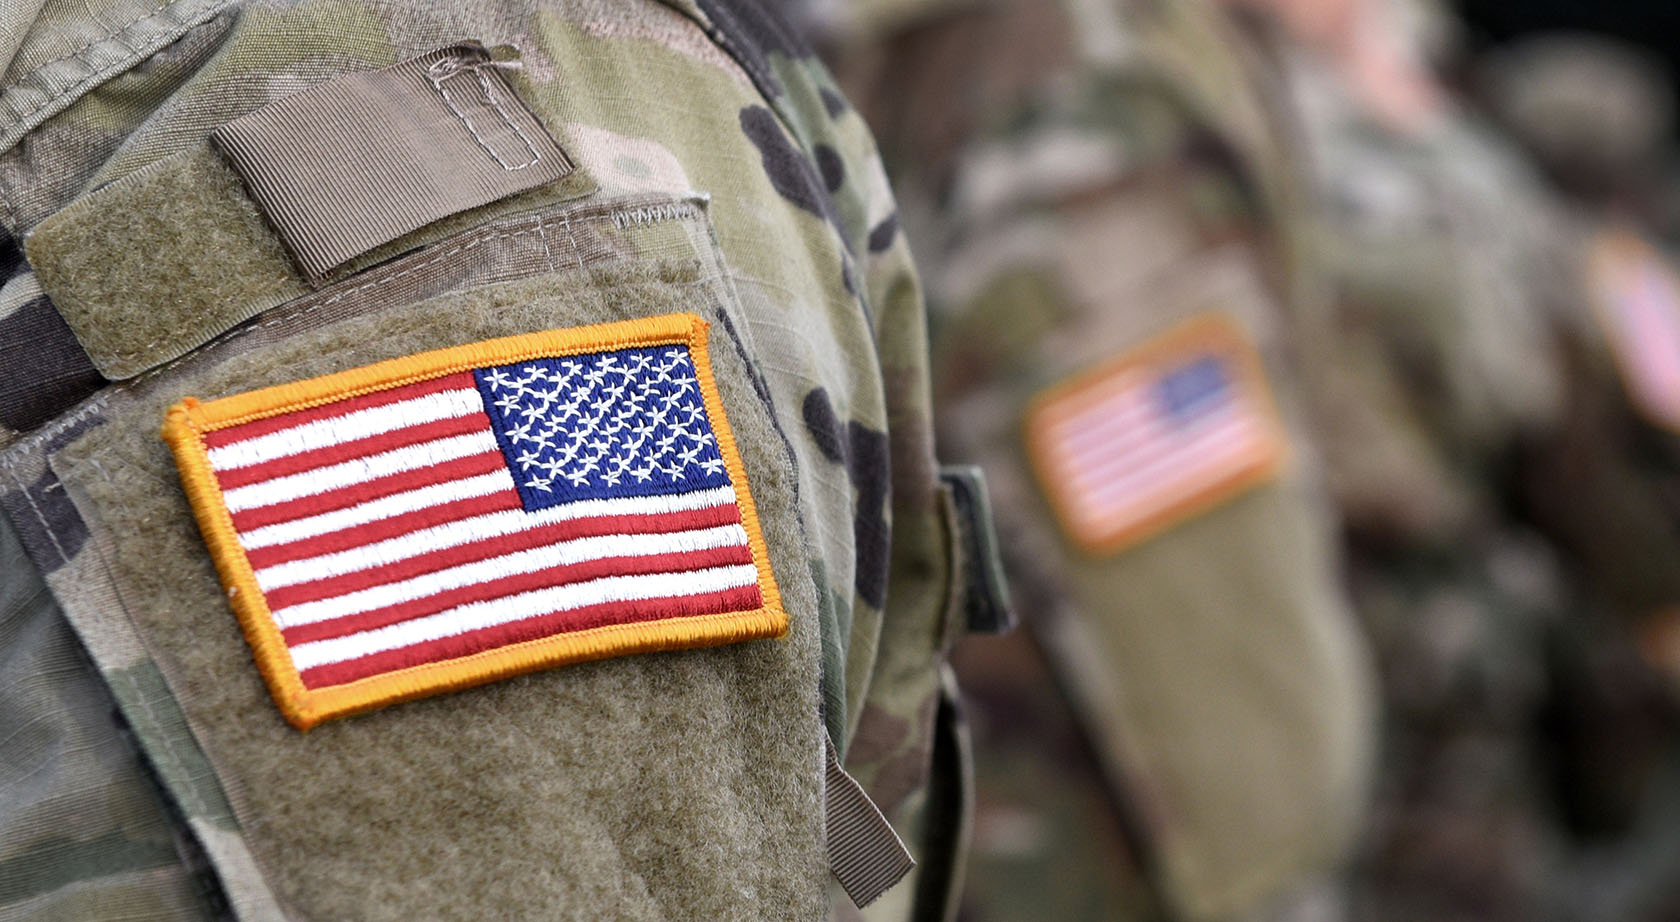 A close-up of an American flag on a military uniform